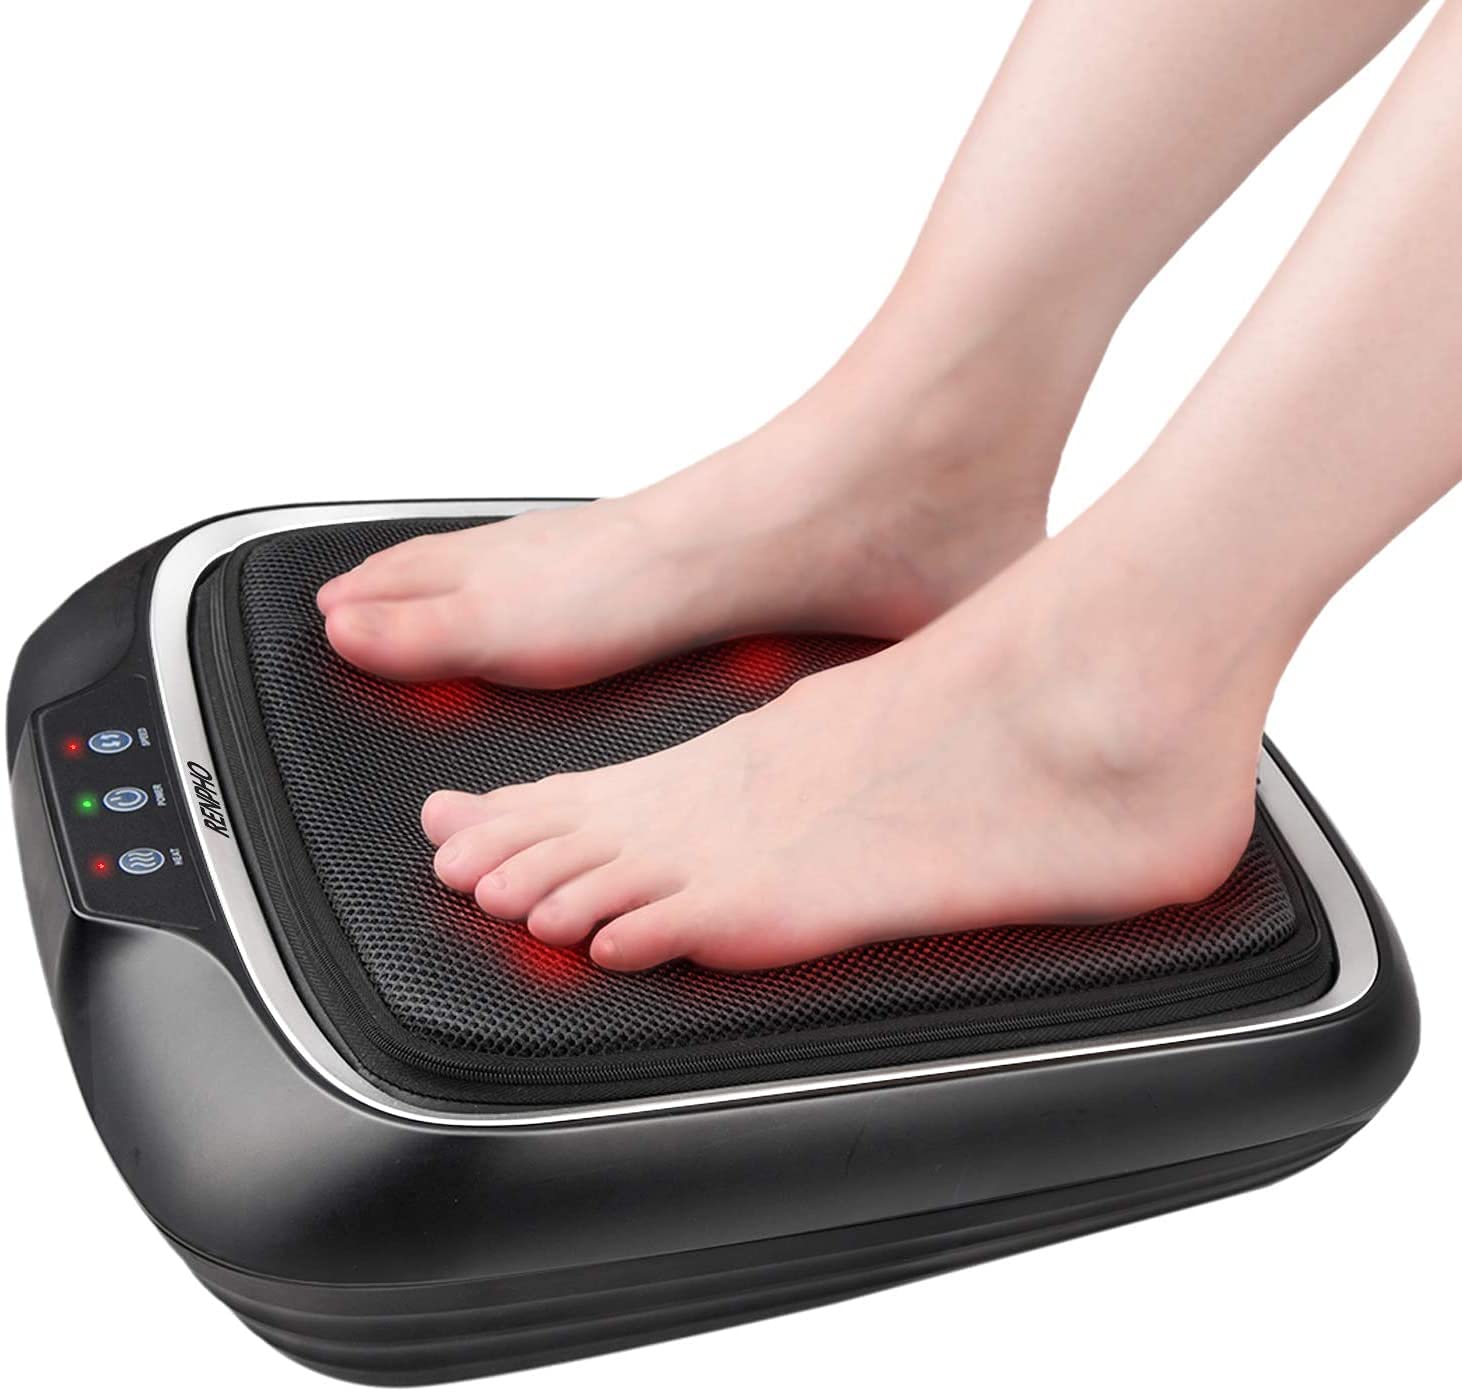 RENPHO Foot Massager with Heat, Electric Shiatsu Feet Massager Machine, Deep-Kneading Foot Massage with Removable Cover